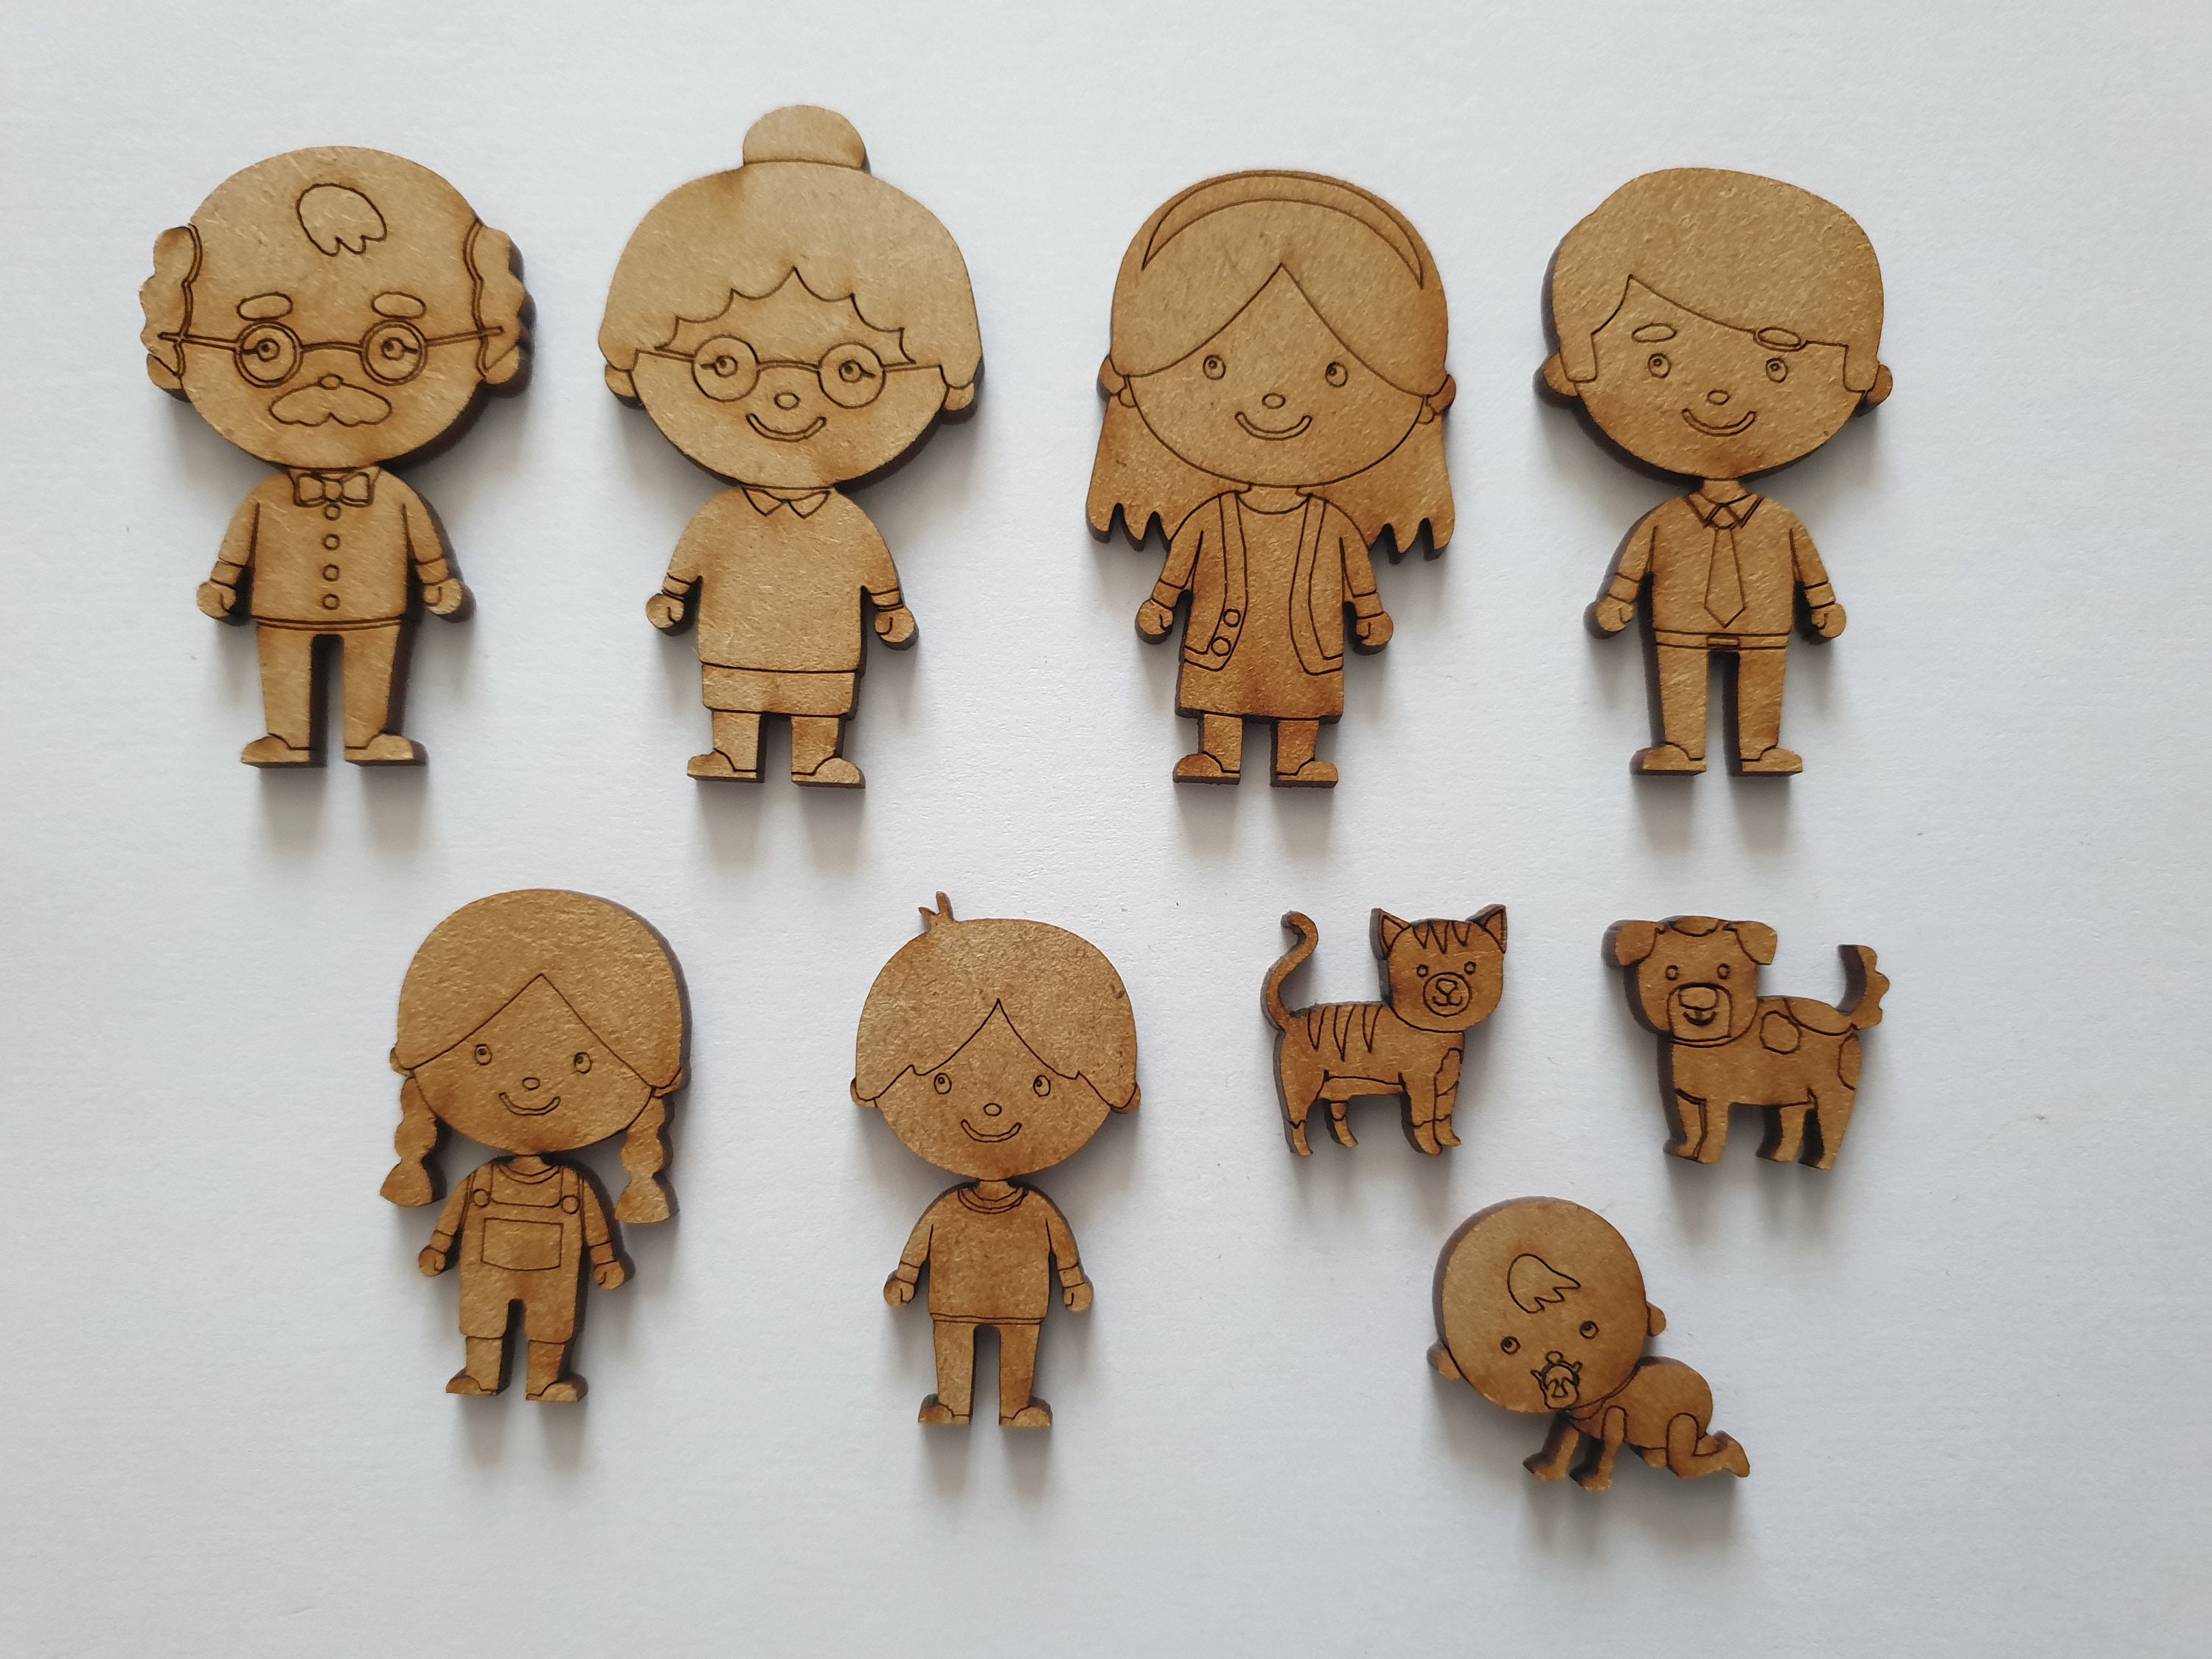 5 Families of 8 Wooden Peg Dolls - Unfinished Wooden People